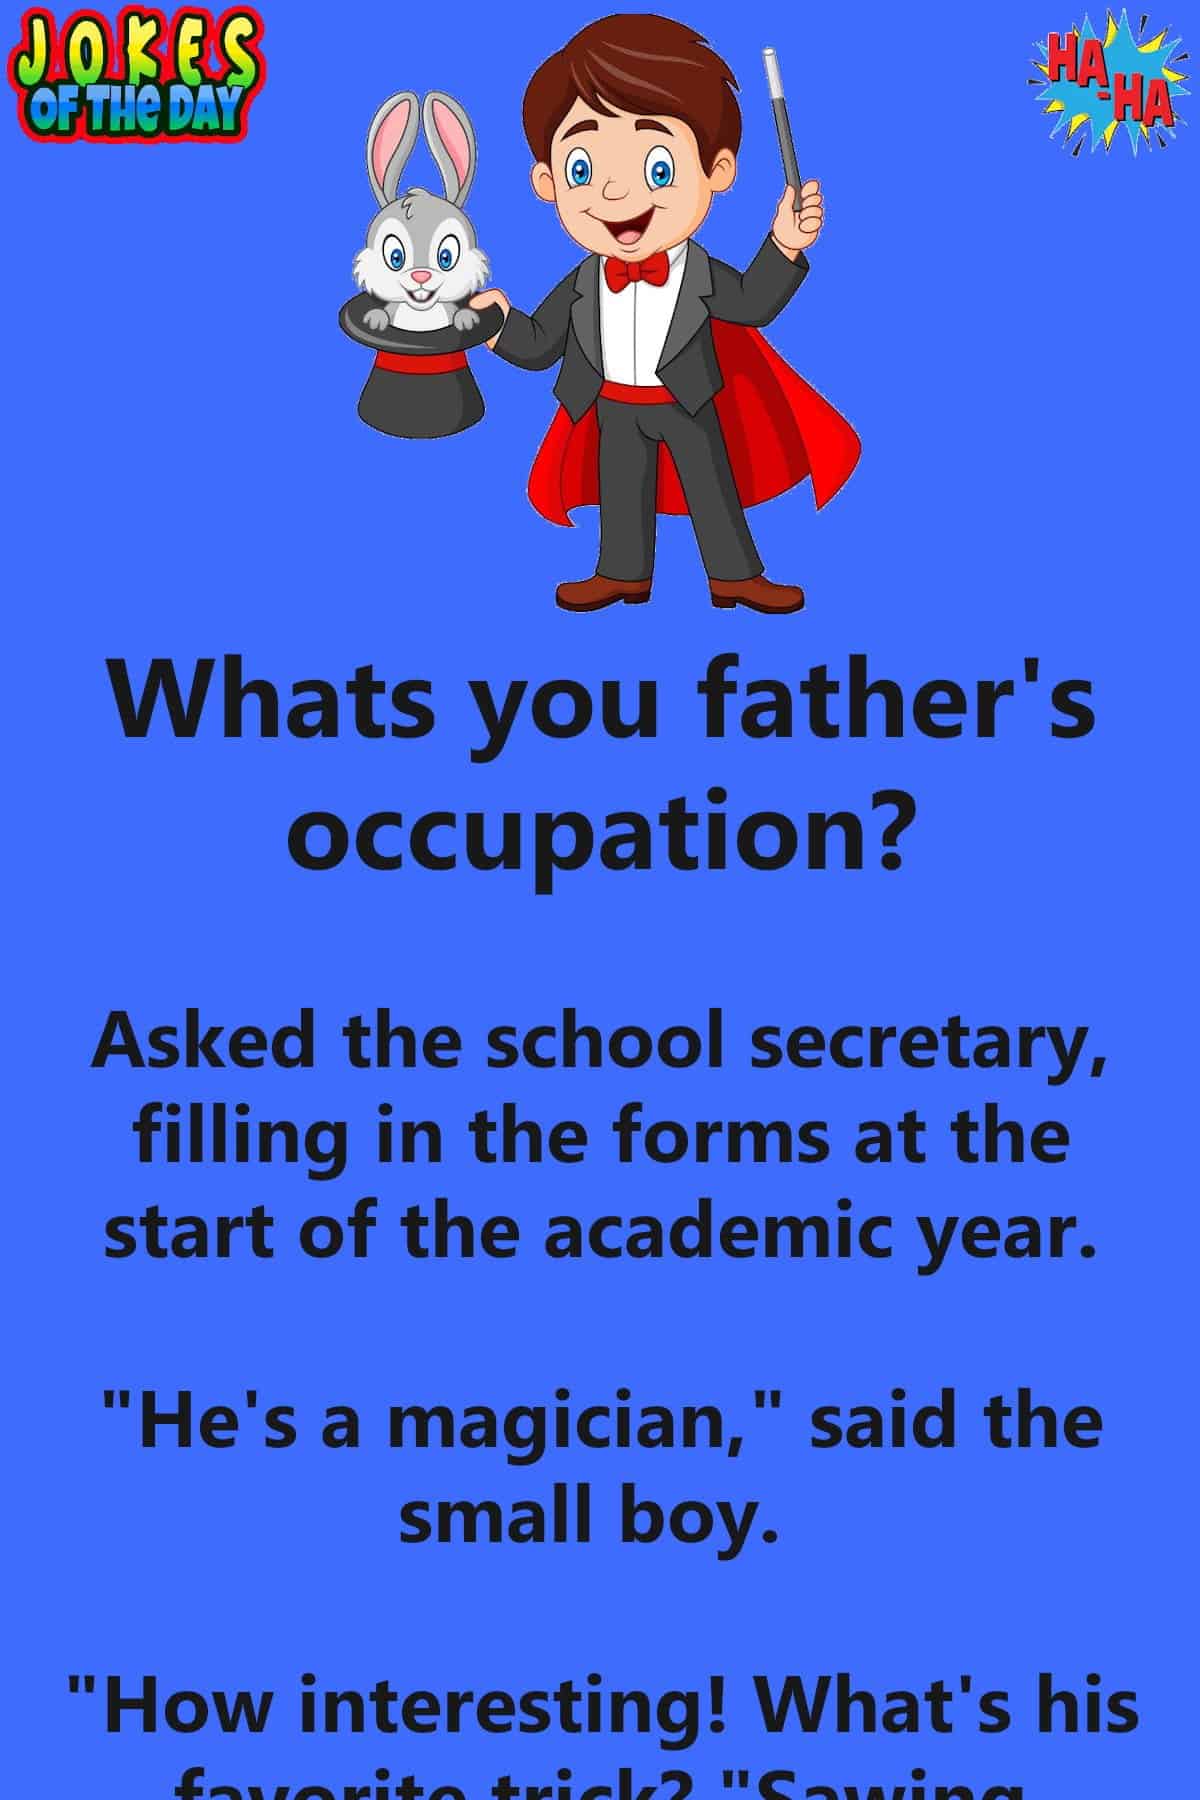 Funny - The school secretary asks the boy his father occupation